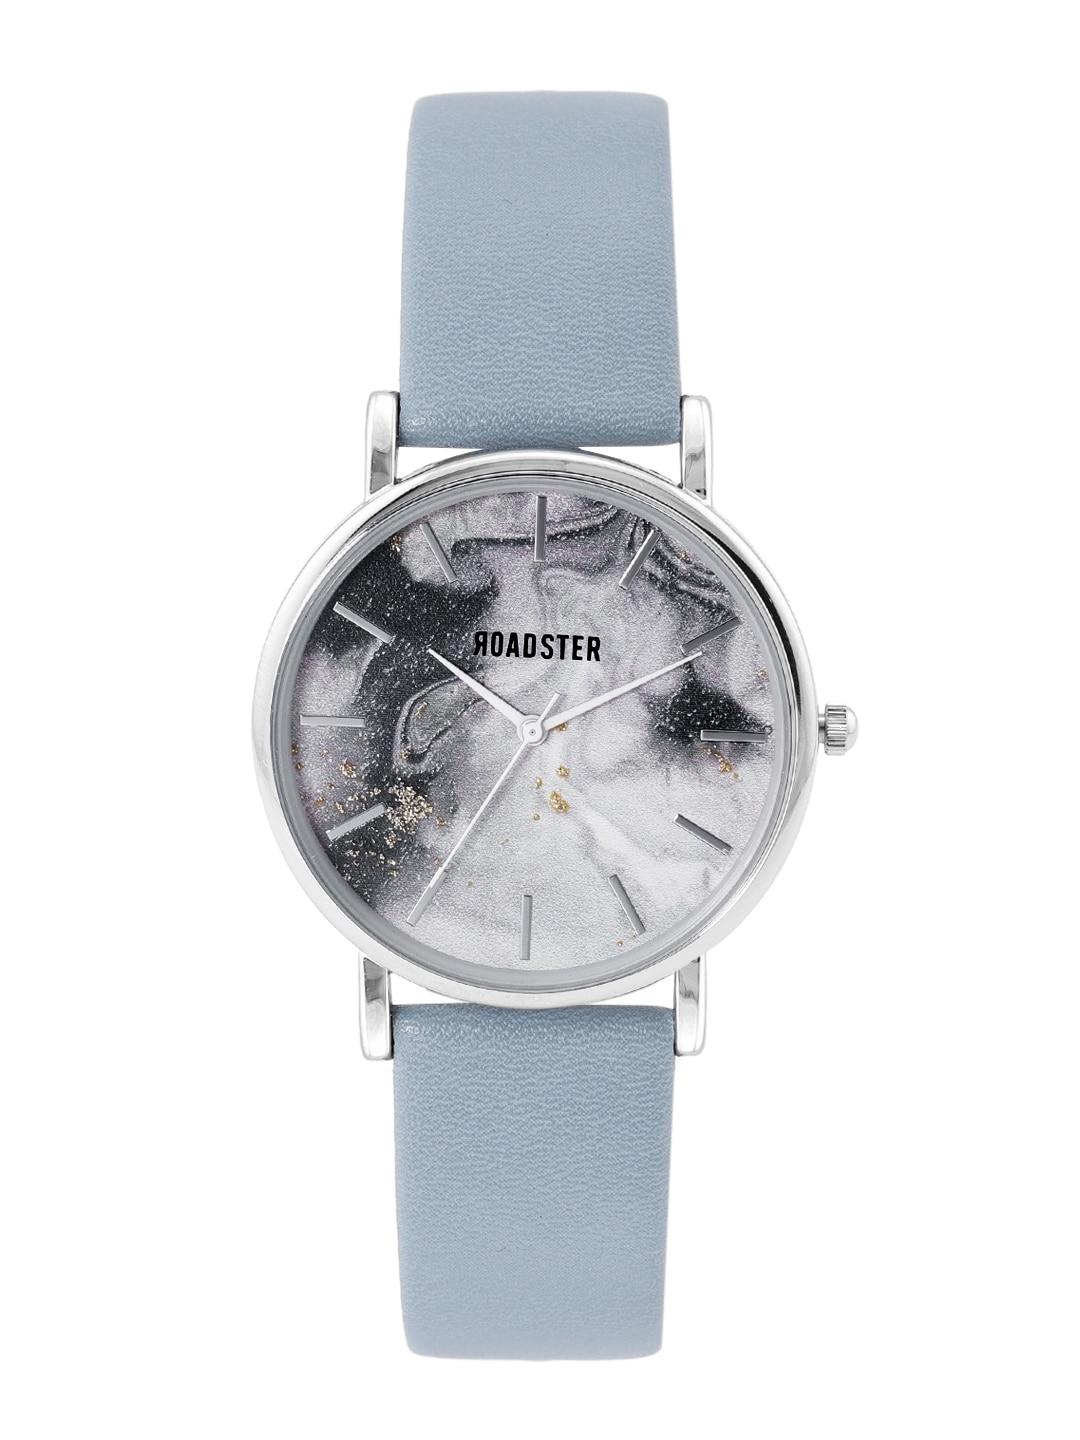 roadster-women-grey-printed-dial-&-blue-straps-analogue-watch